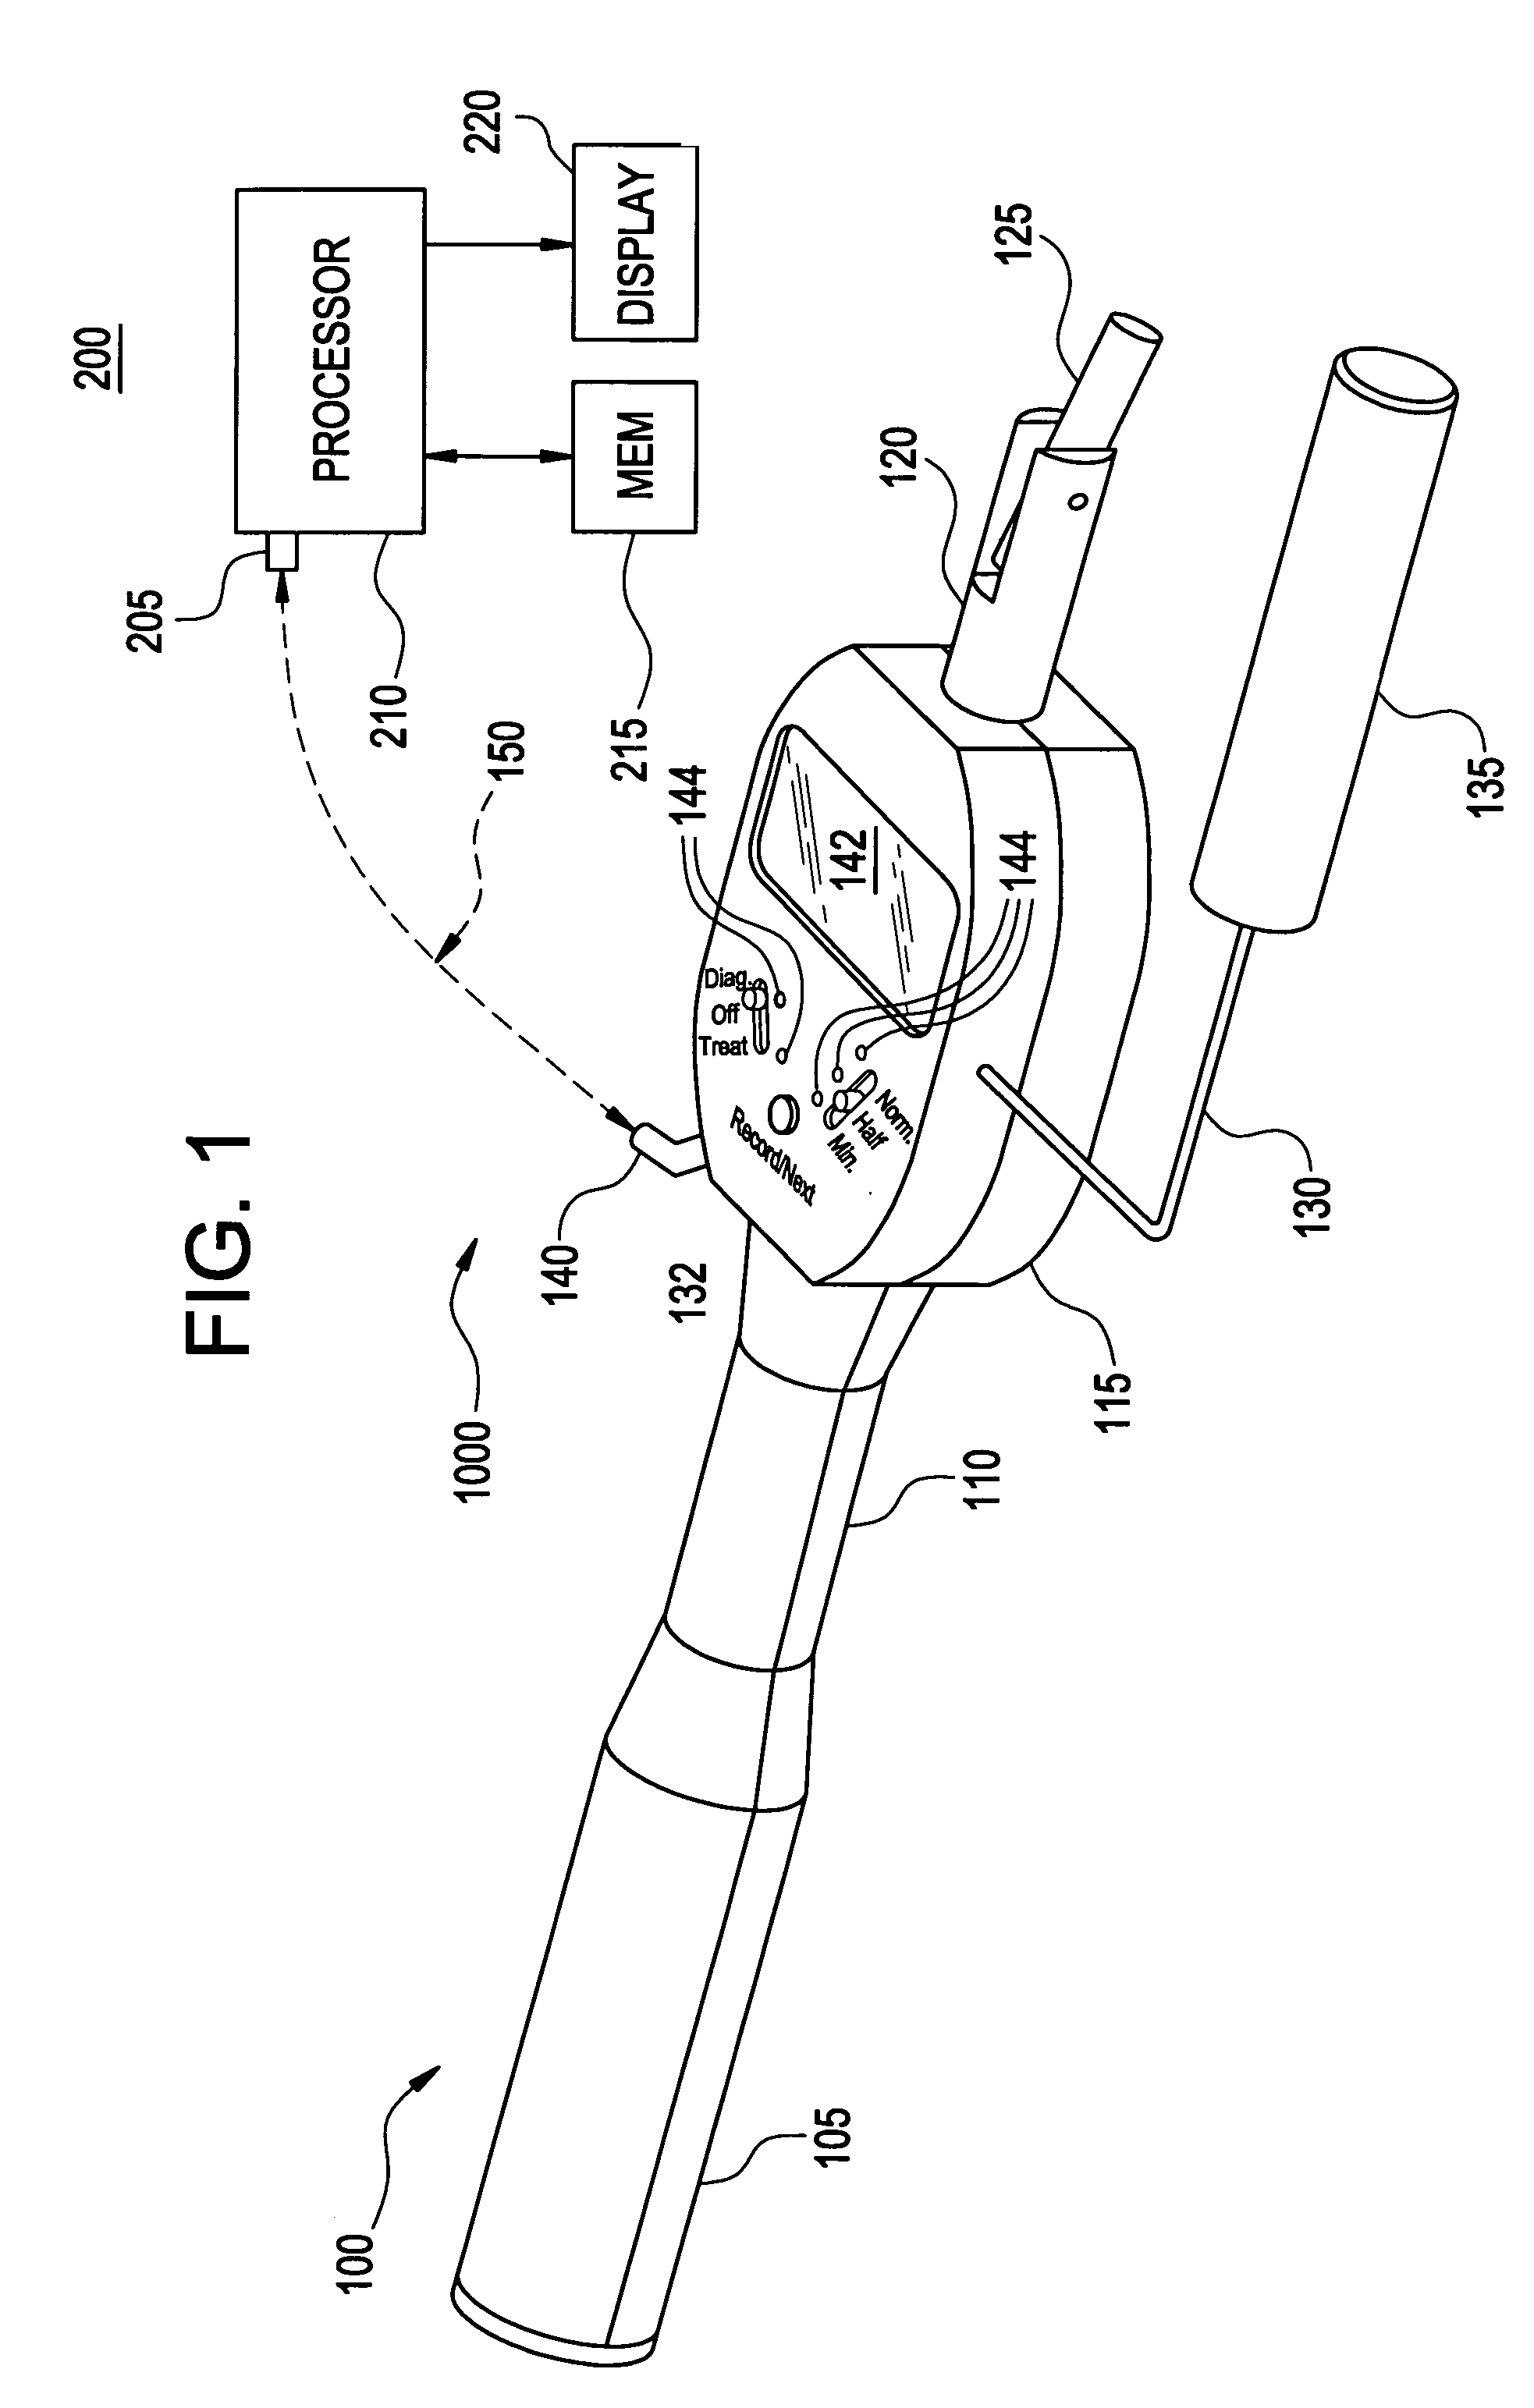 Electronic acupuncture device and system, and method of managing meridian energy balance data of a patient